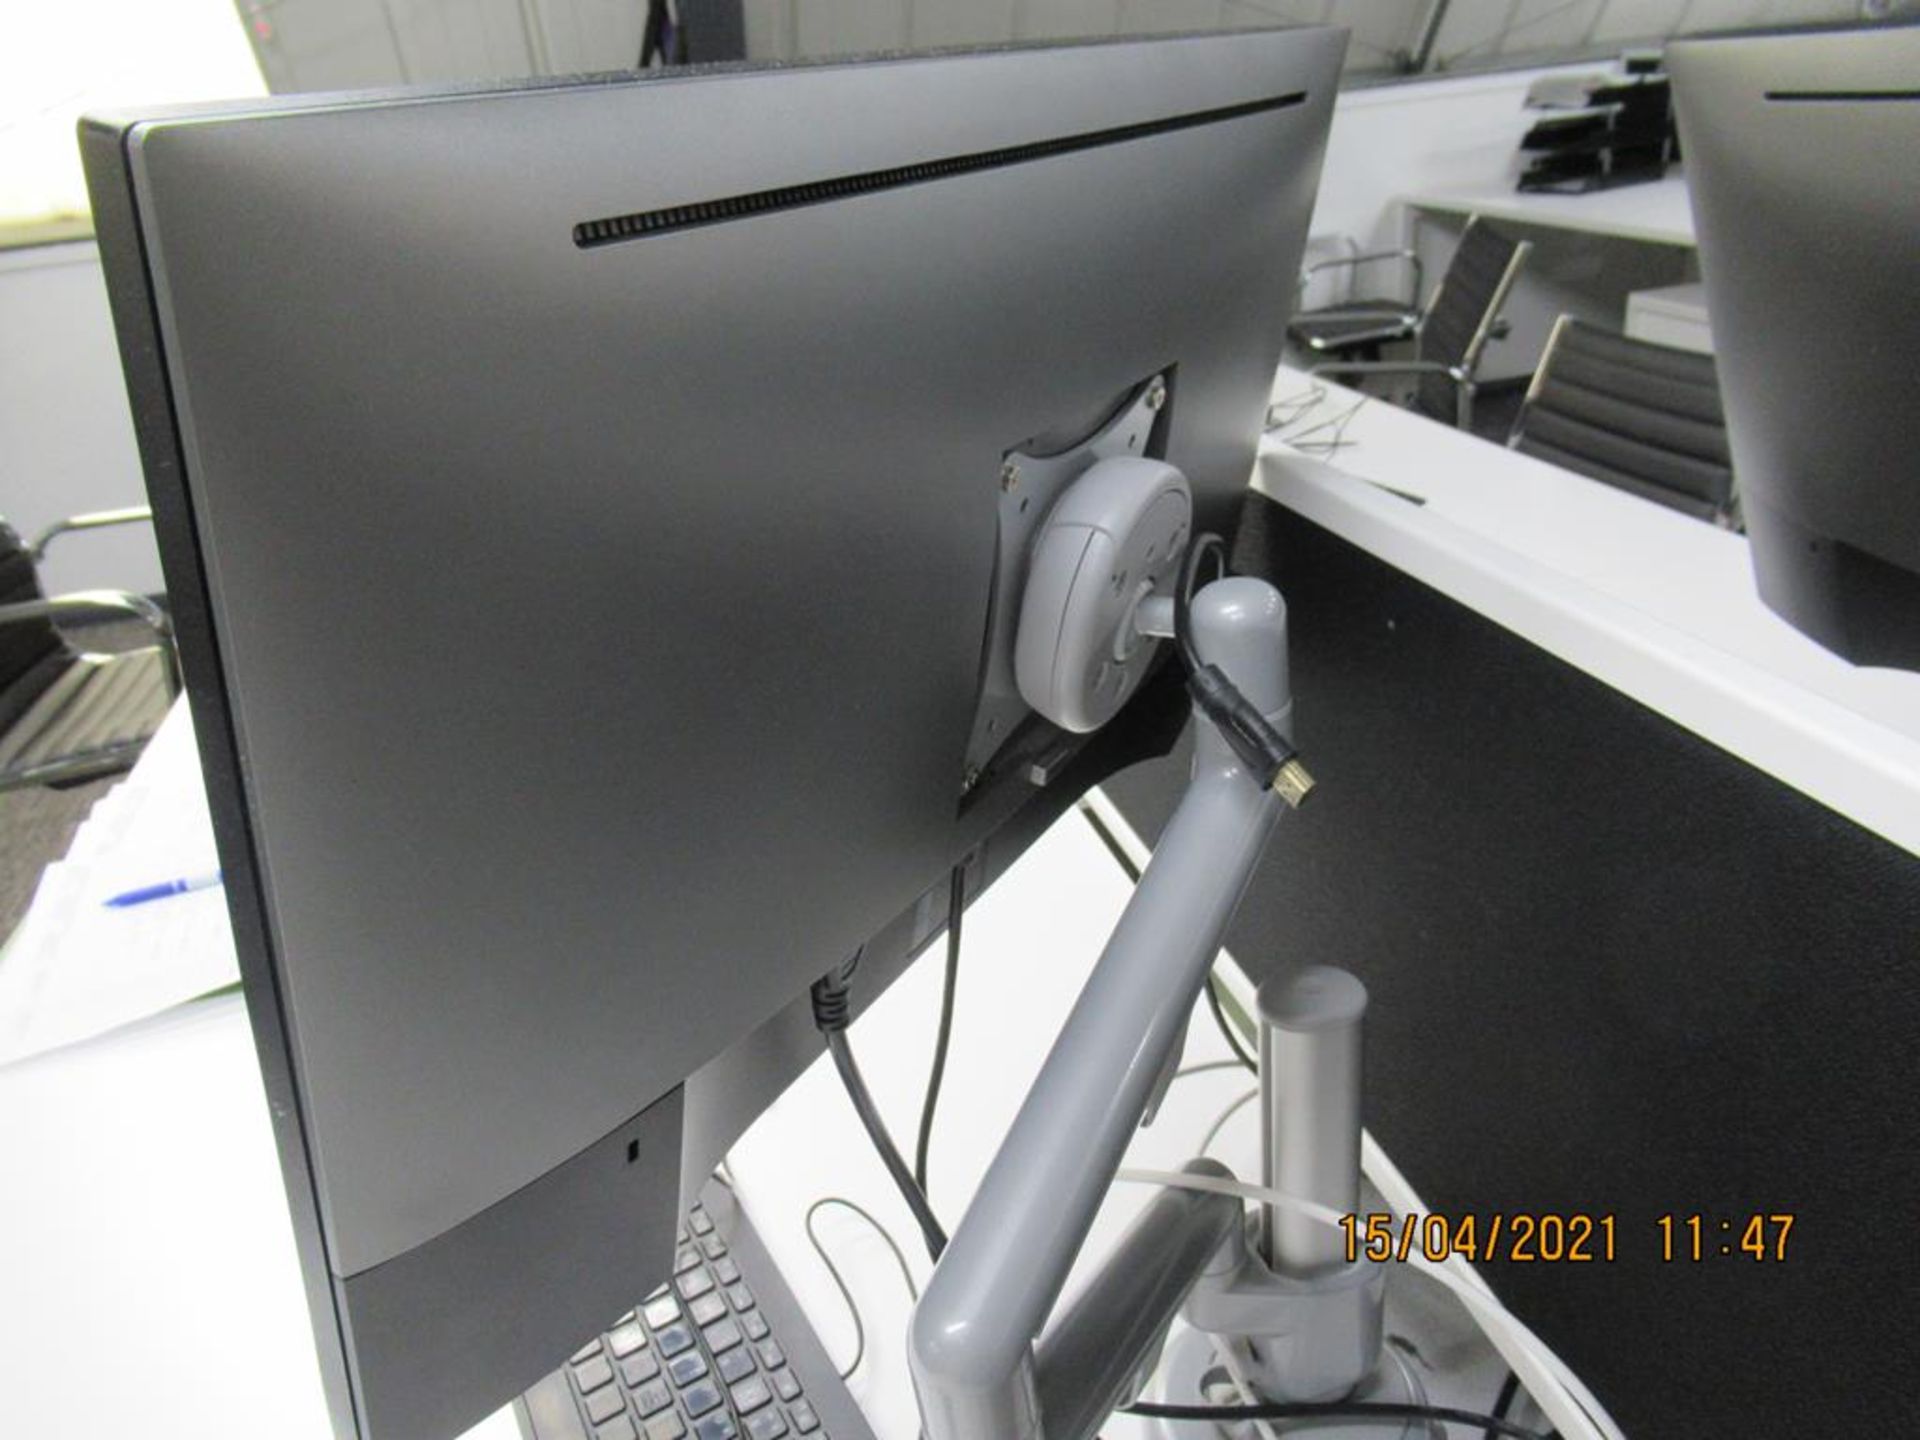 2x Dell Flat Screen Monitors with Keyboards, Mouses , Monitor Stands Included - Image 2 of 3